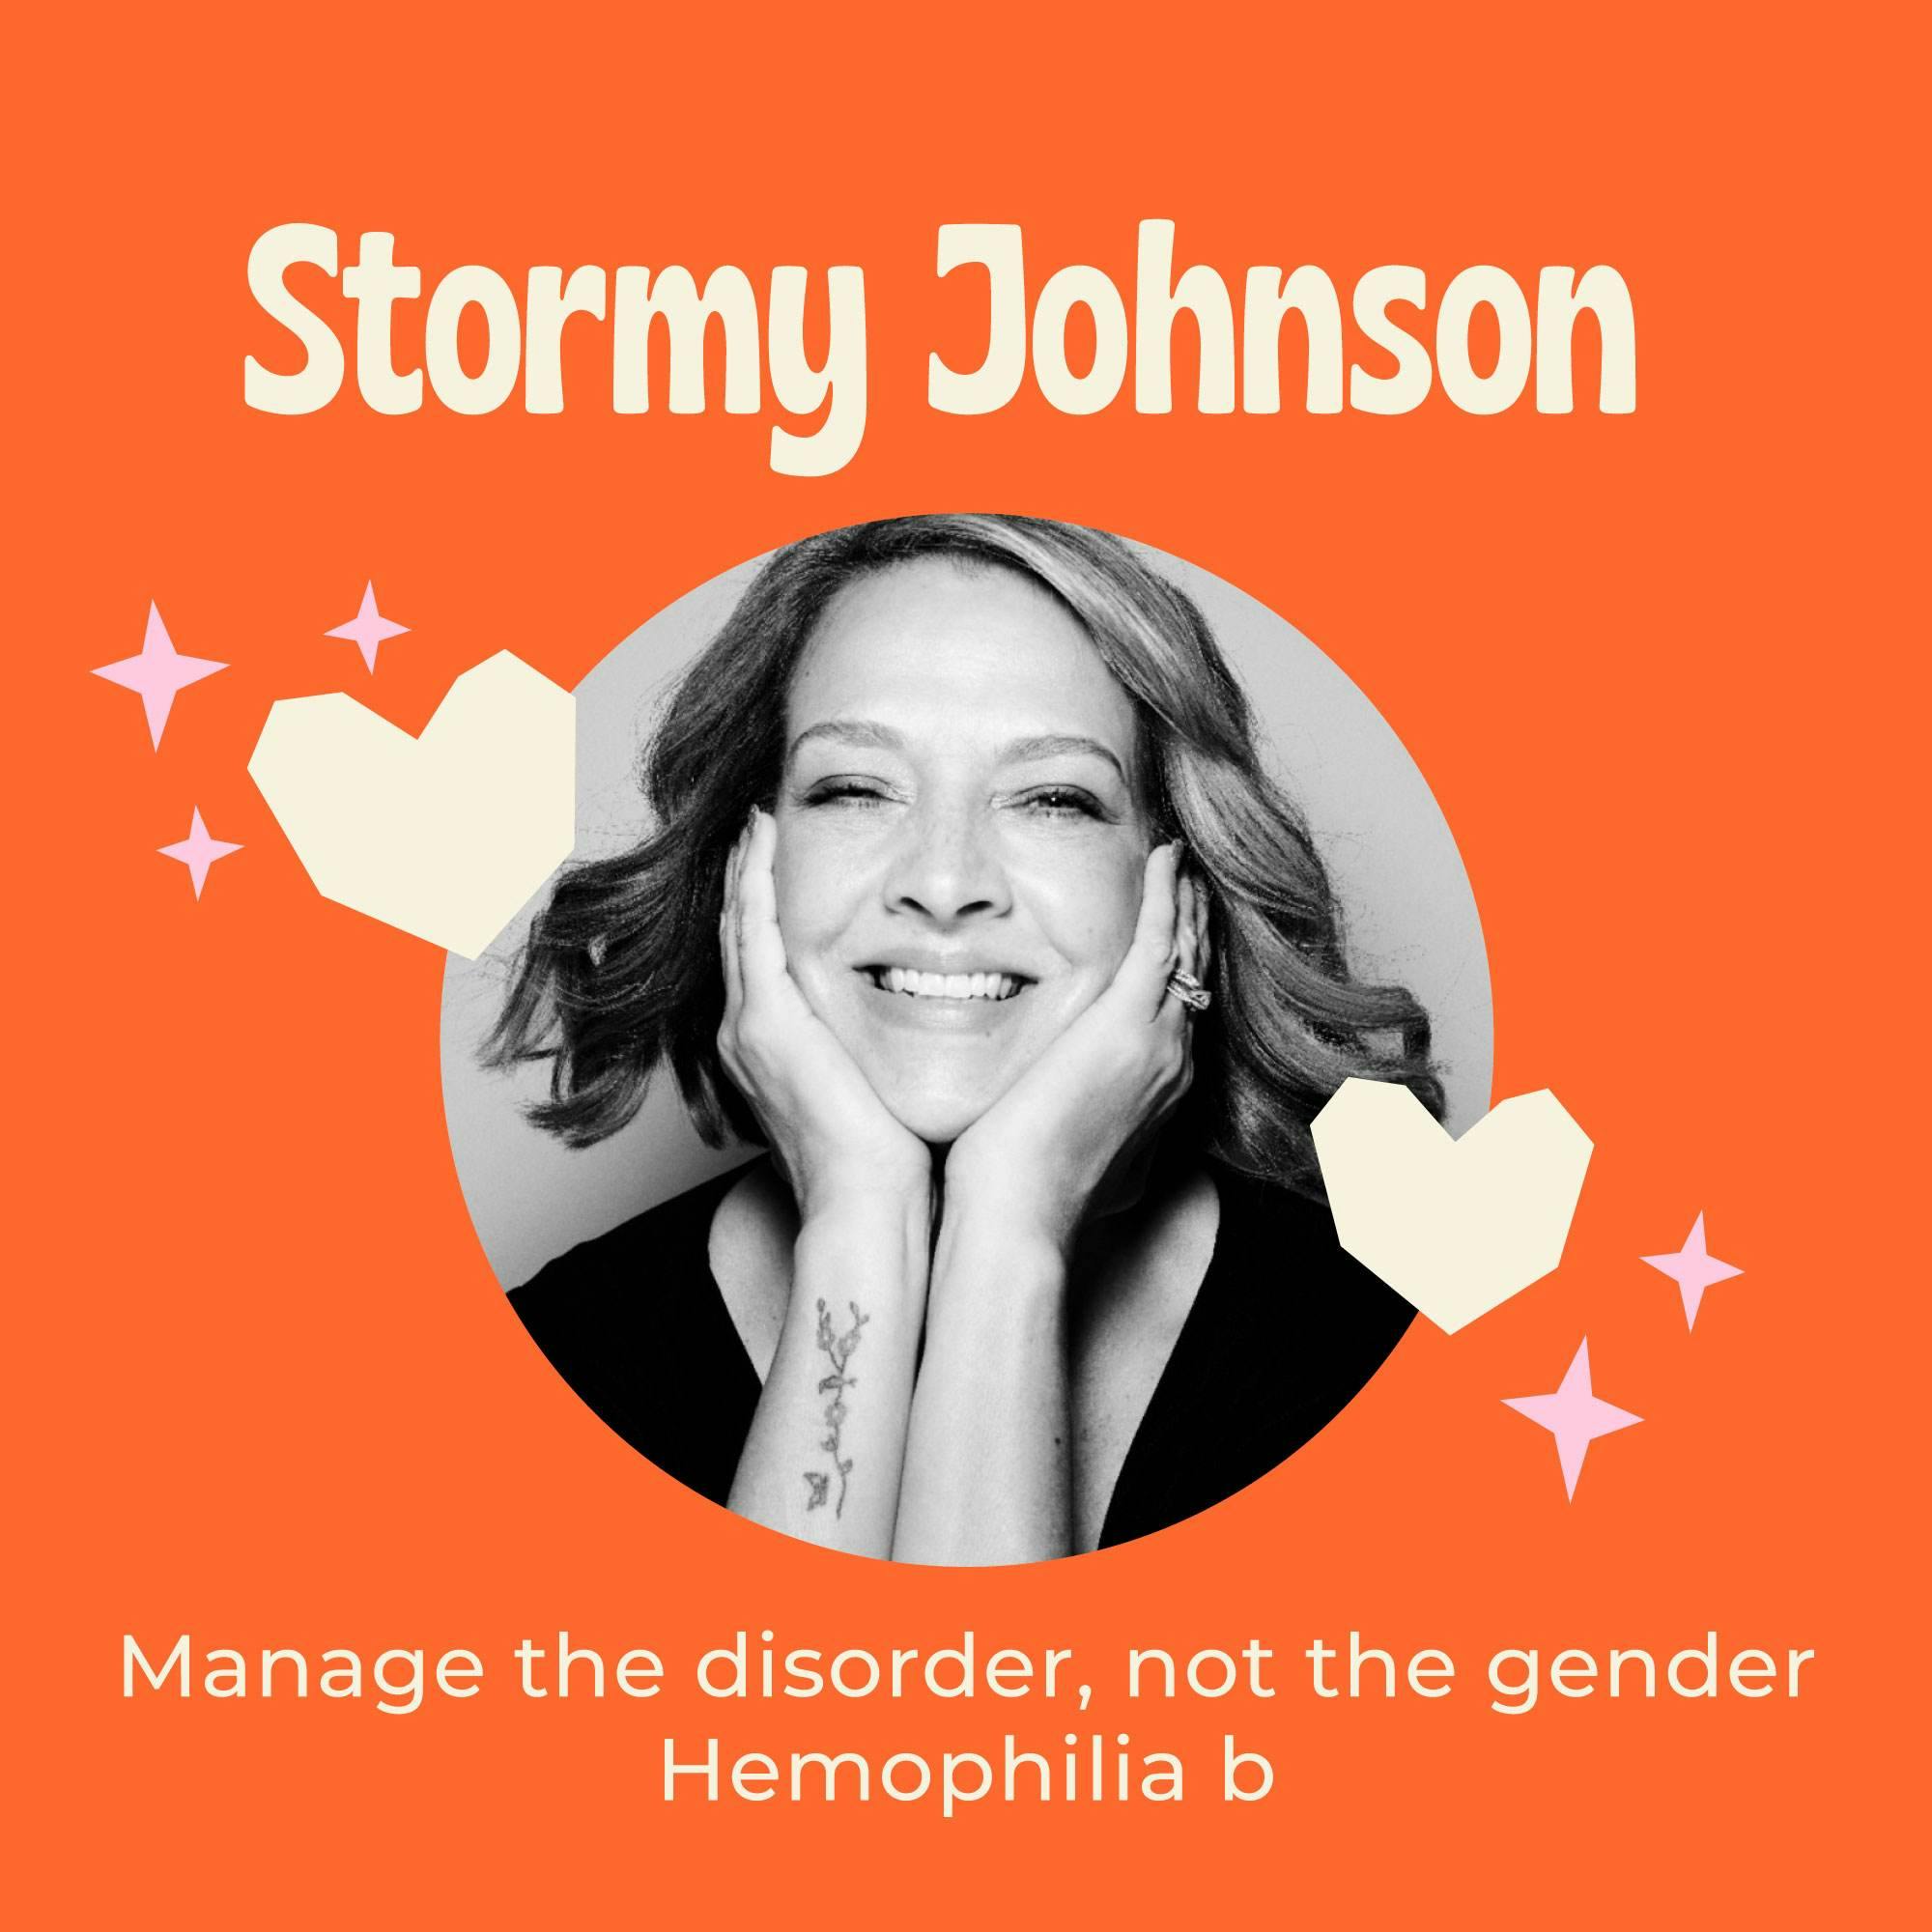 A Mom’s Advocacy For Her Son Who Has Hemophilia B Led to Her Own Diagnosis - With Stormy Johnson